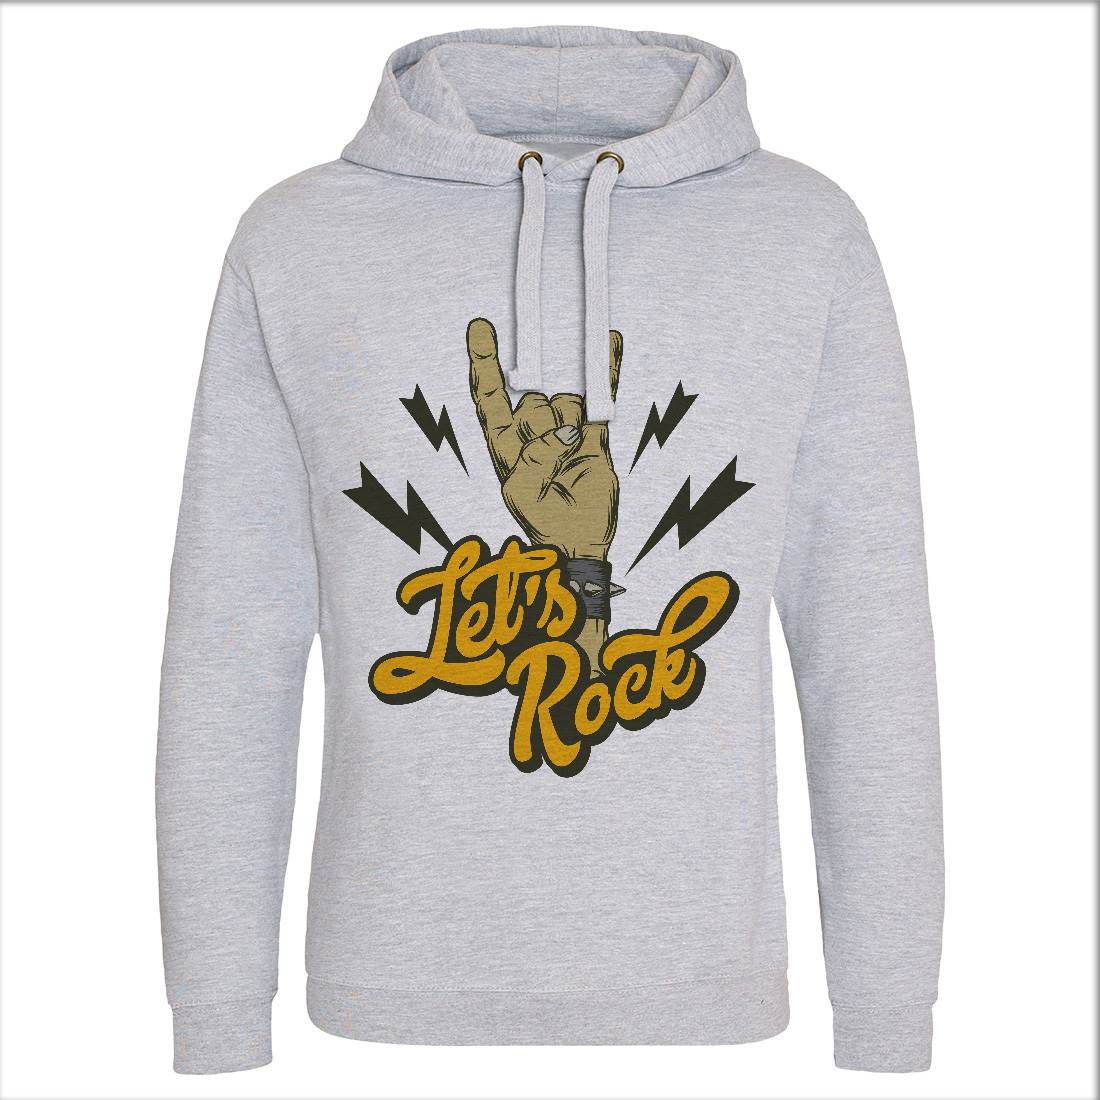 Let&#39;s Rock Mens Hoodie Without Pocket Music D953